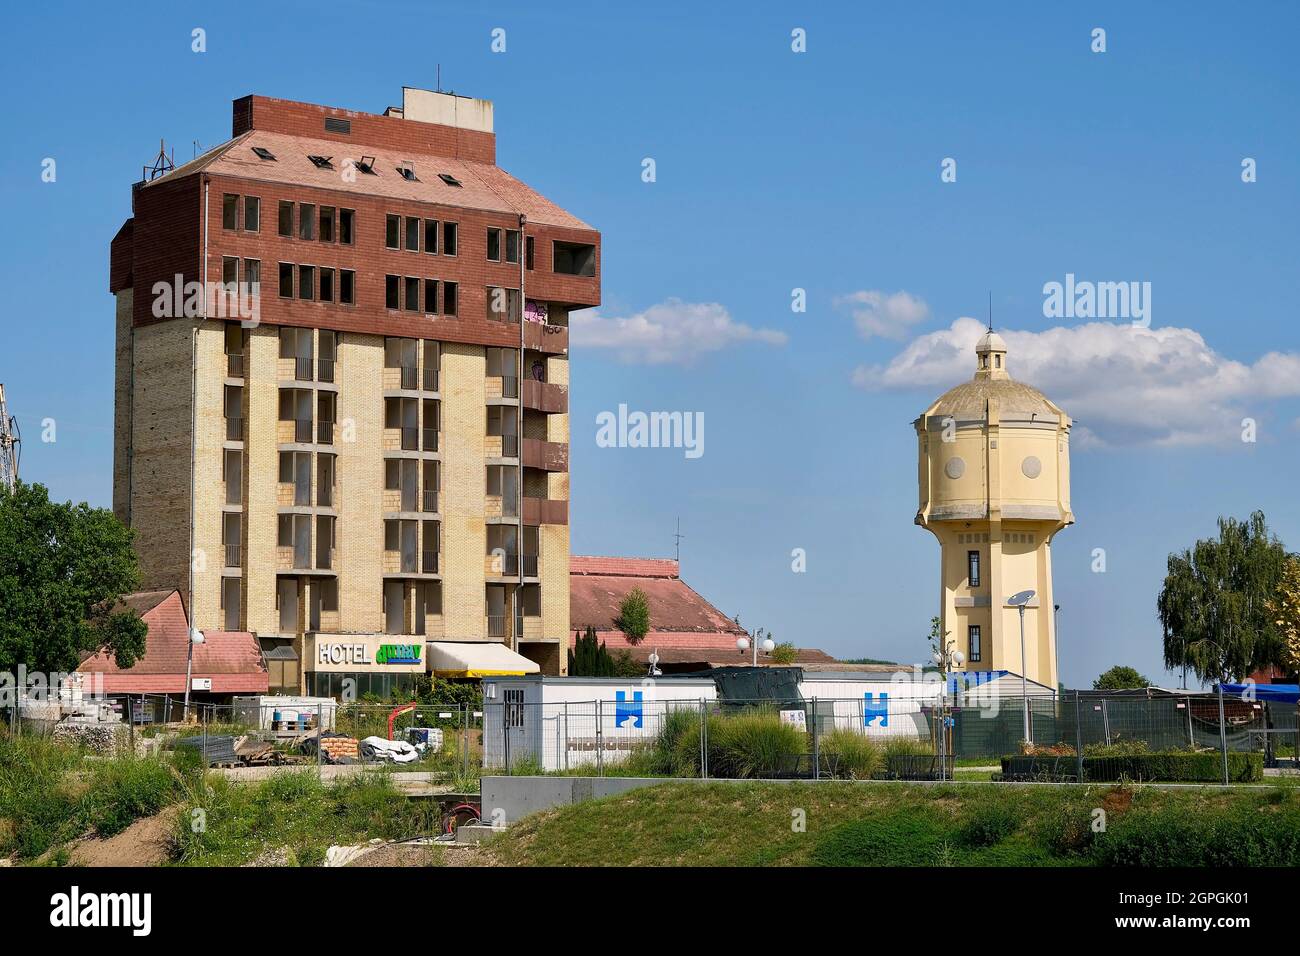 Croatia, Slavonia, Vukovar, the partly restored Dunav hotel and the old water tower Stock Photo